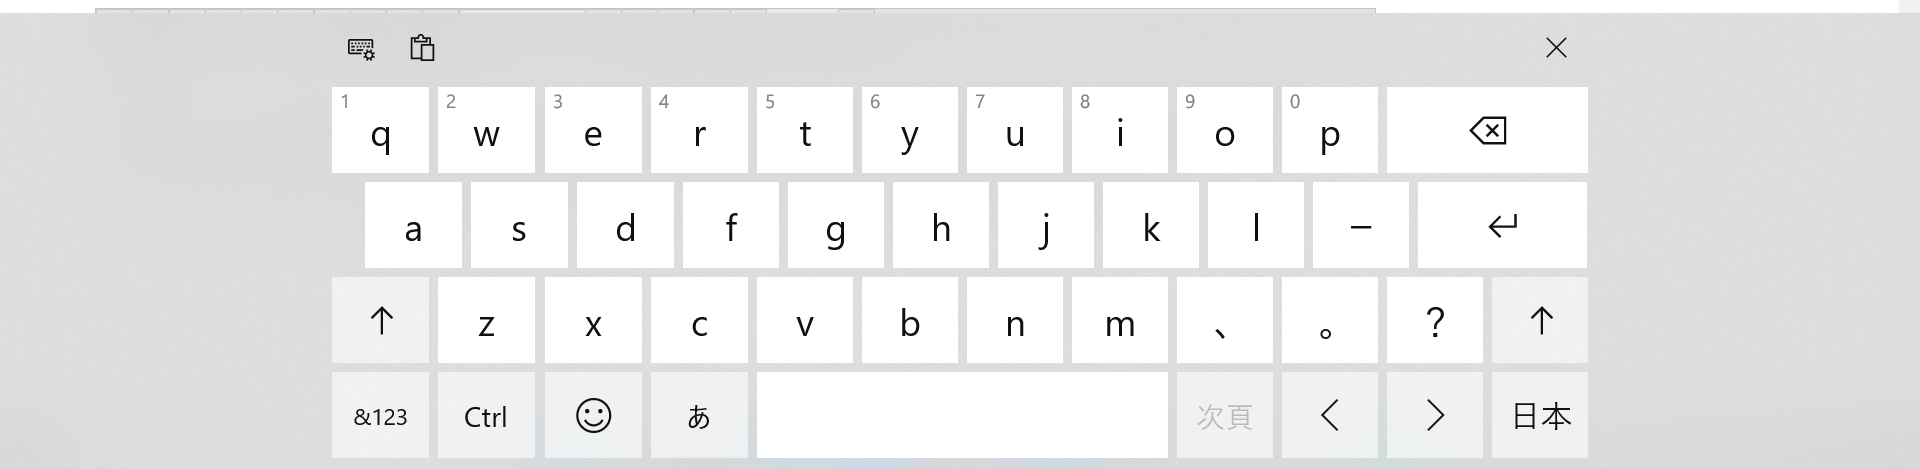 Windows 10 virtual keyboard not displaying Japanese characters 583068dd-0f75-4d22-8a81-e77674bd3038?upload=true.png